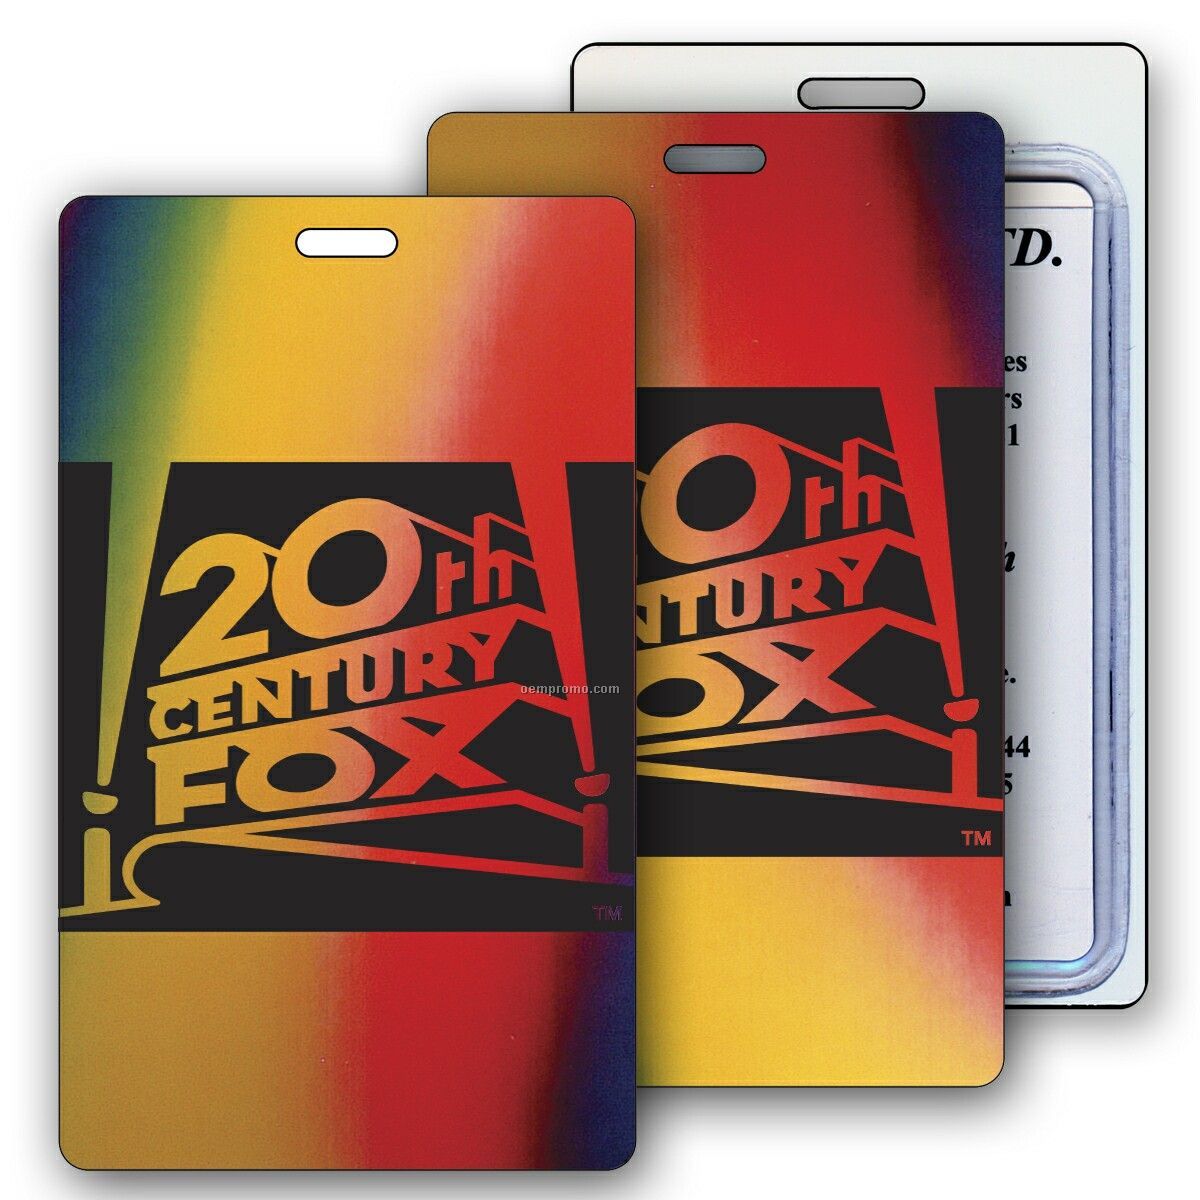 Lenticular Luggage Tags (Stock) Change Colors